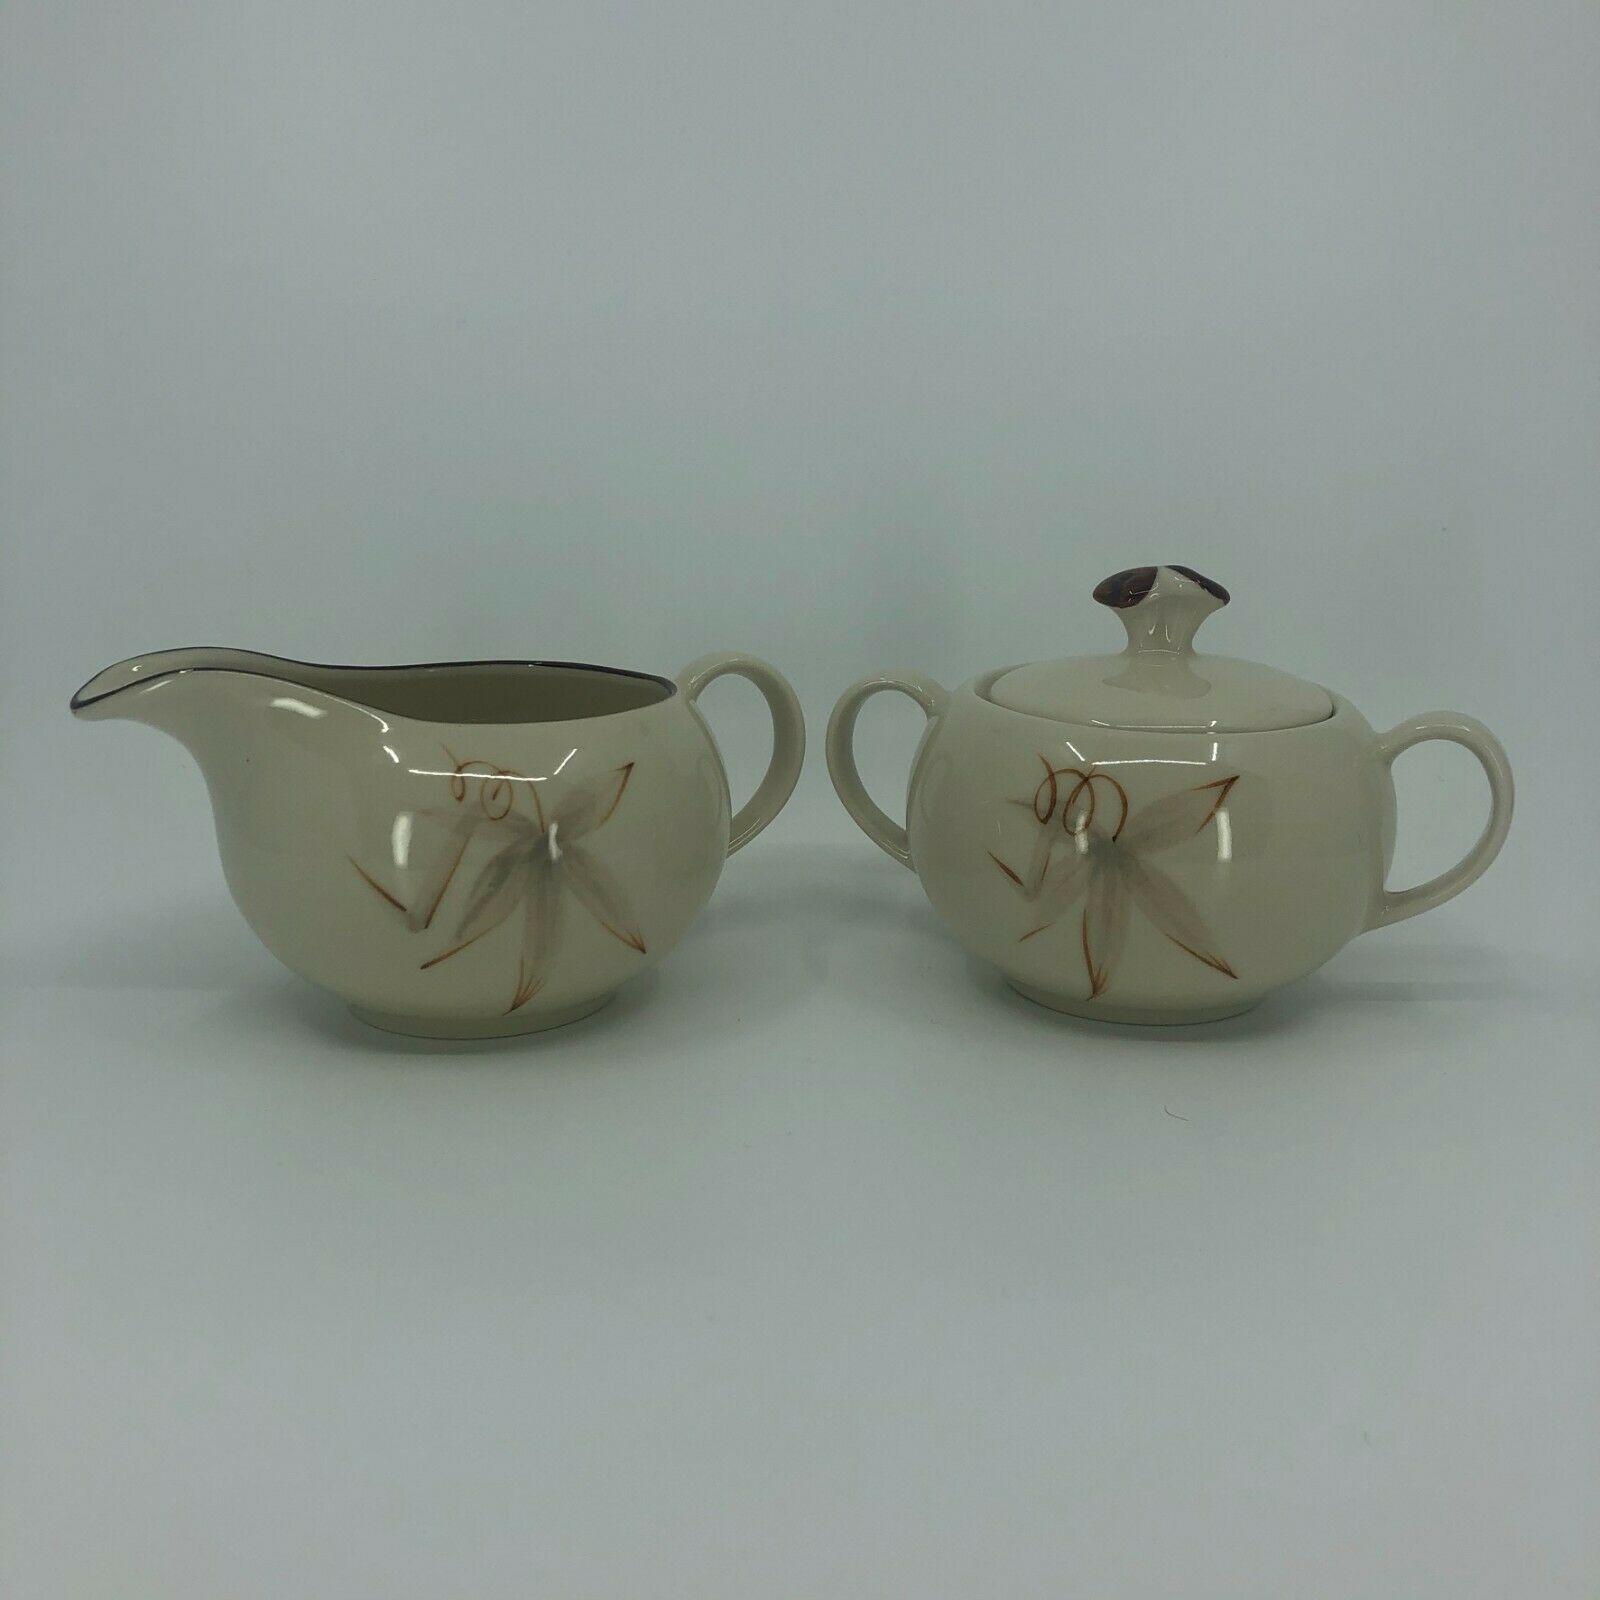 Winfield Pottery Company Cream And Sugar Set In Passion Flower Pattern